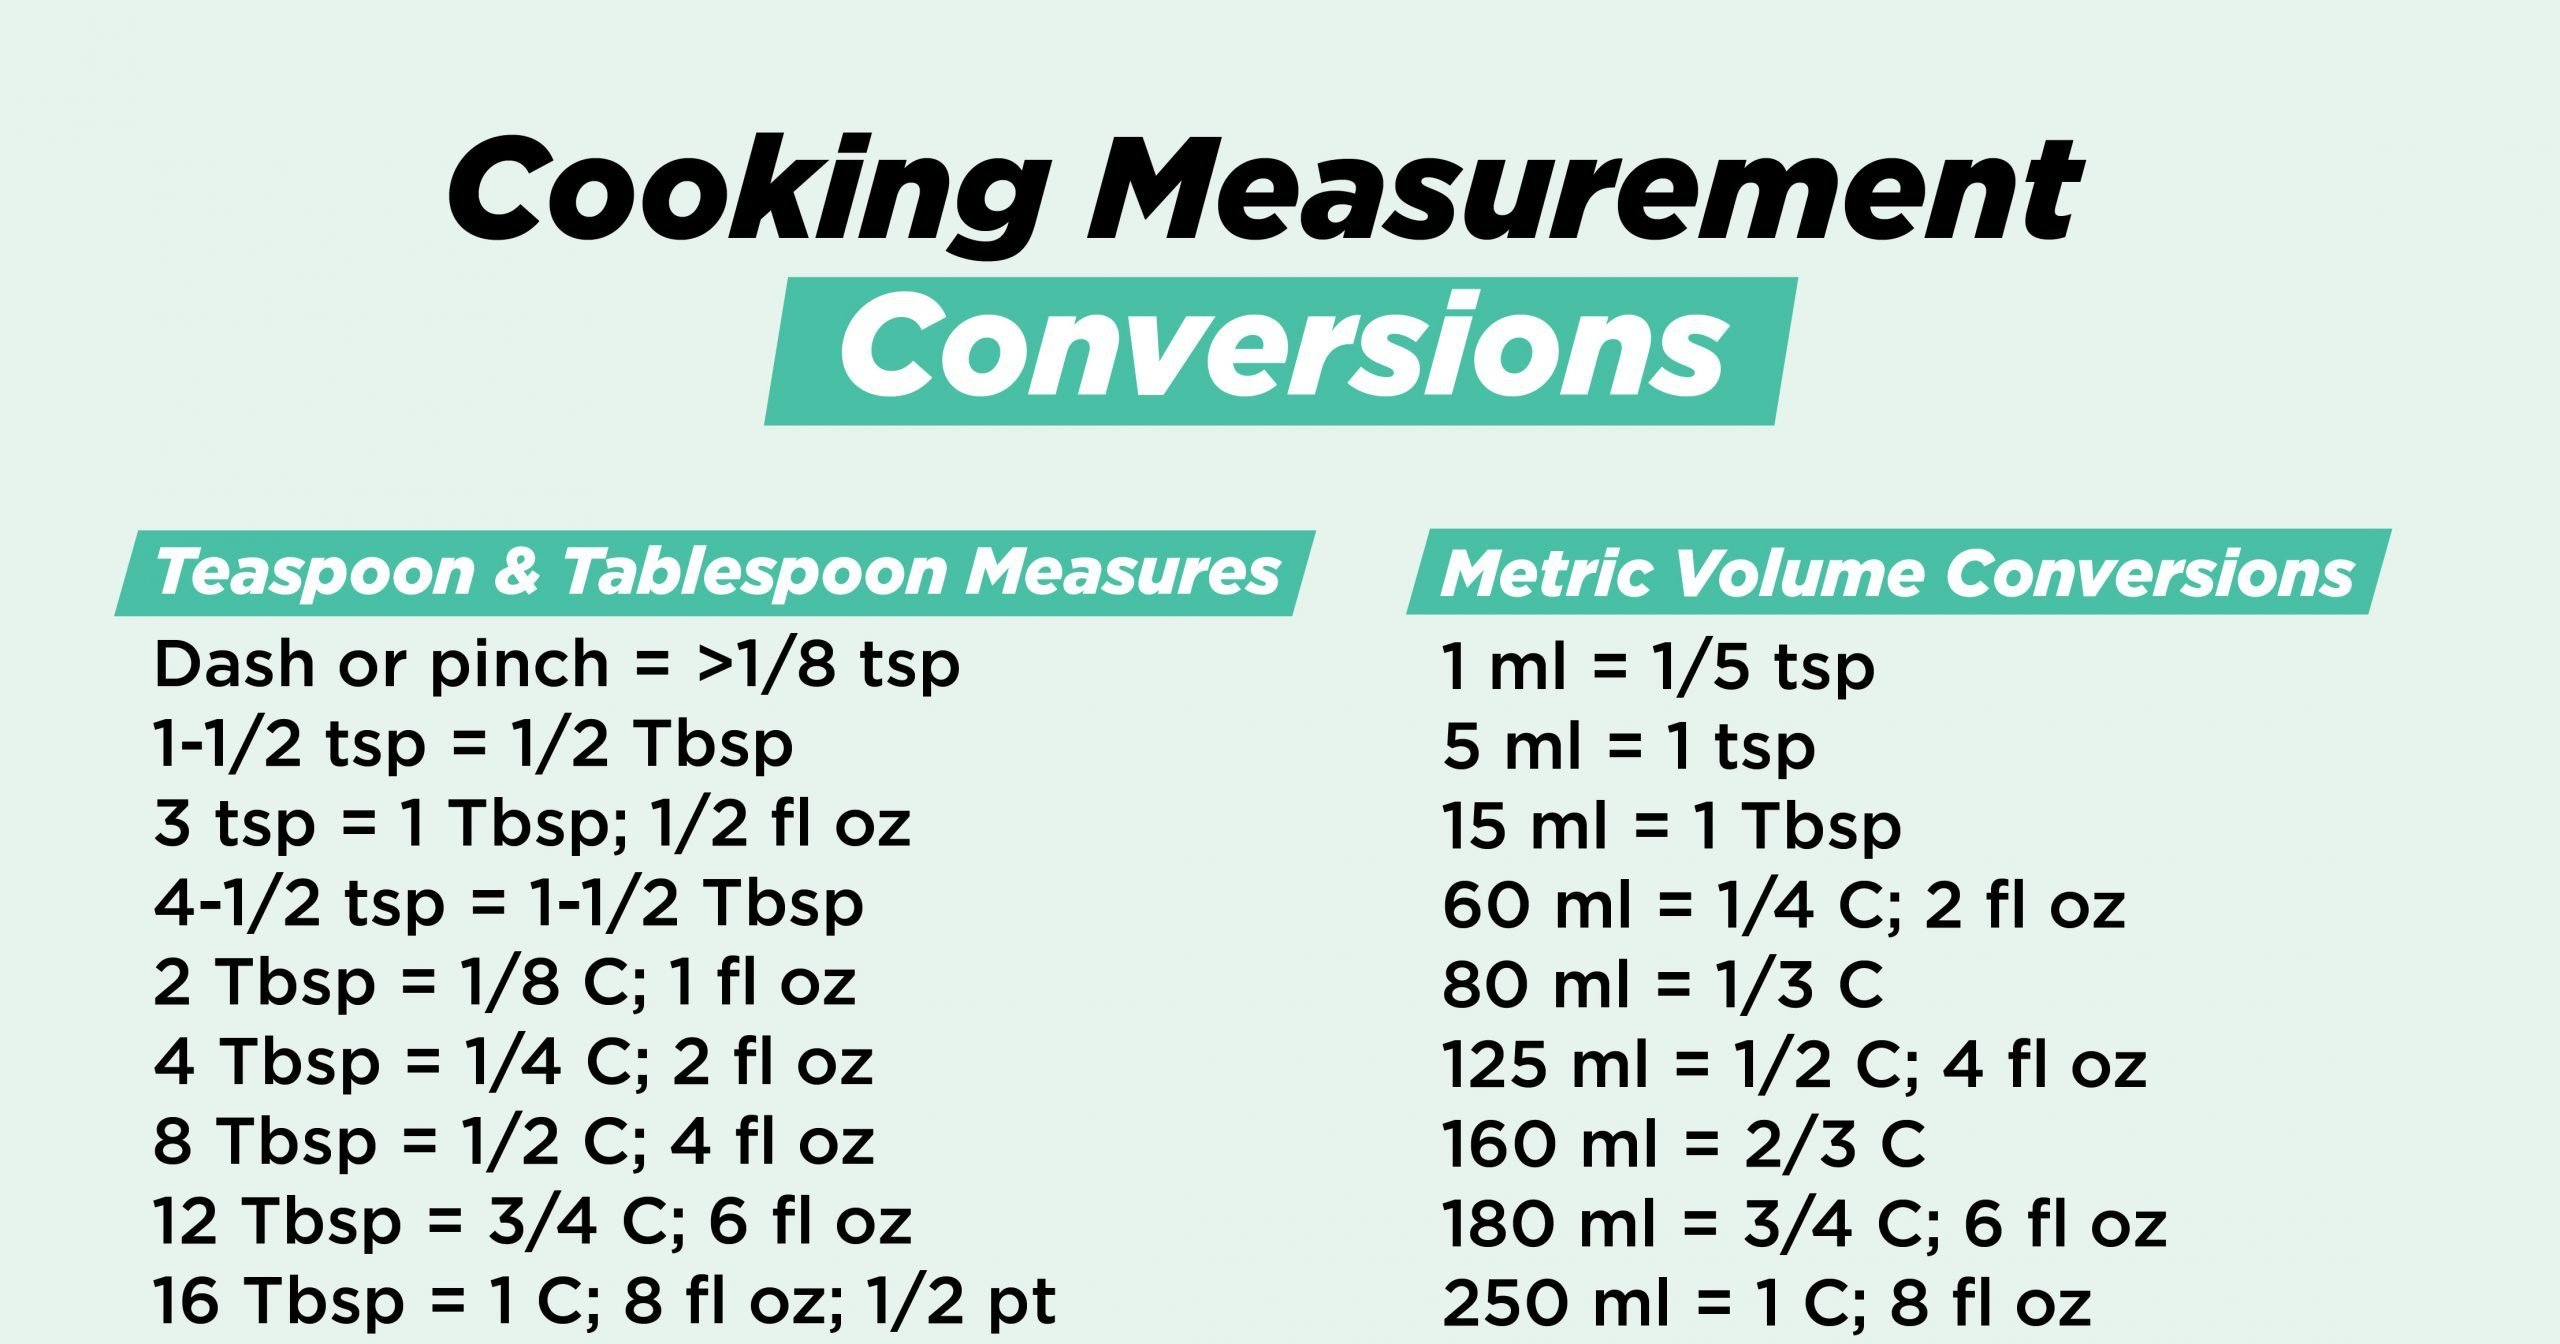 https://www.tasteofhome.com/wp-content/uploads/2022/04/cooking-measurement-conversions-chart-graphic-S-crop-copy-scaled.jpg